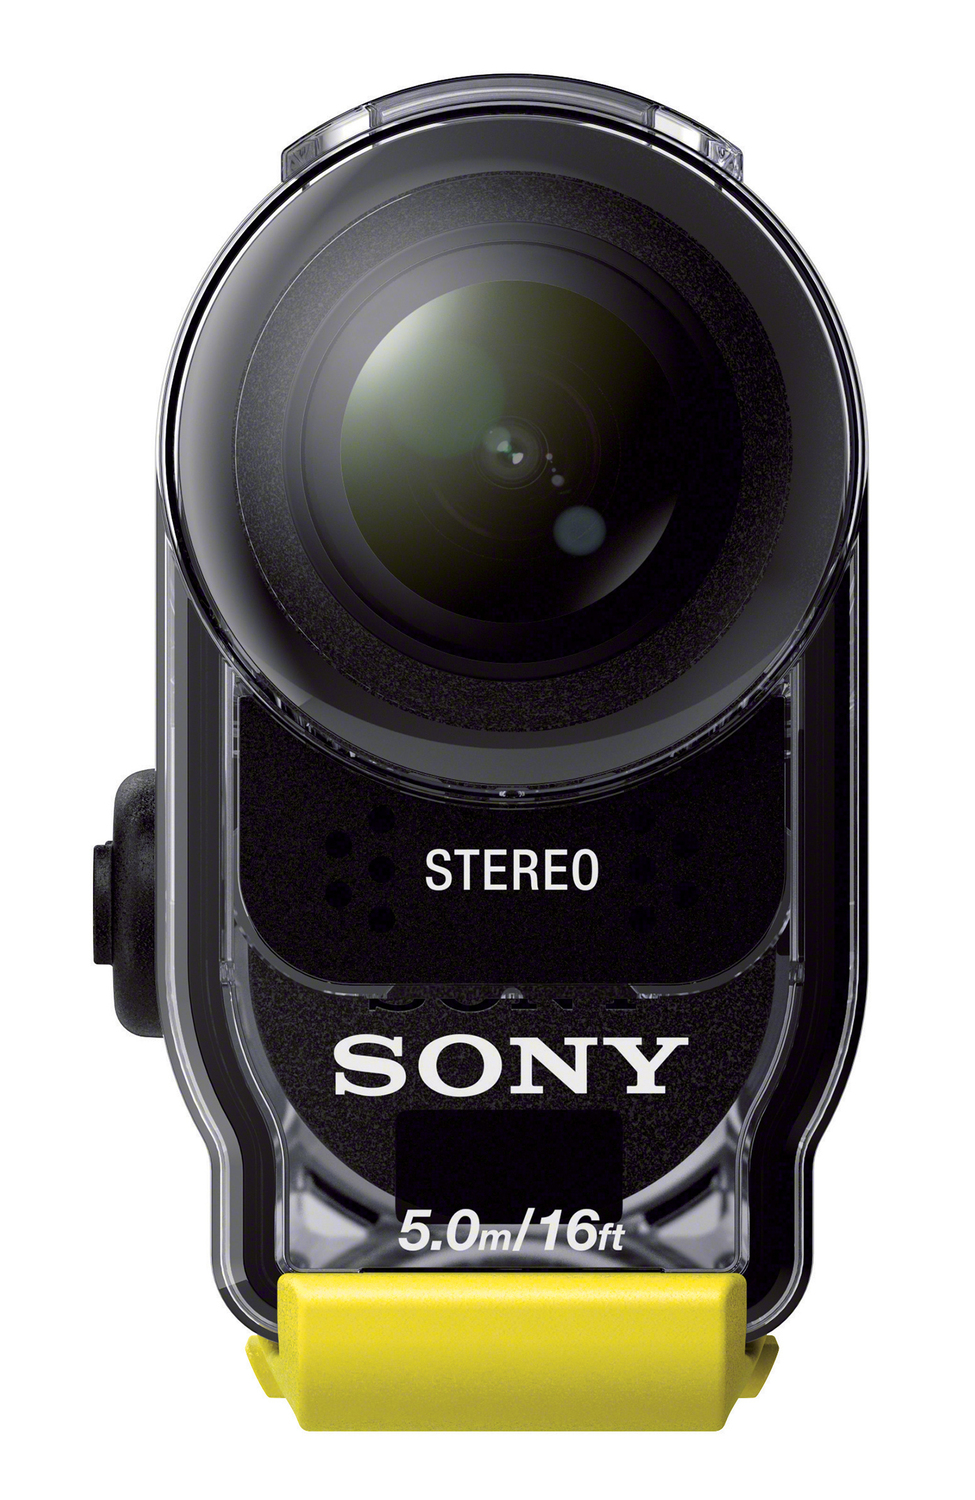 SONY HDR-AS20B SPORT ACTION CAM